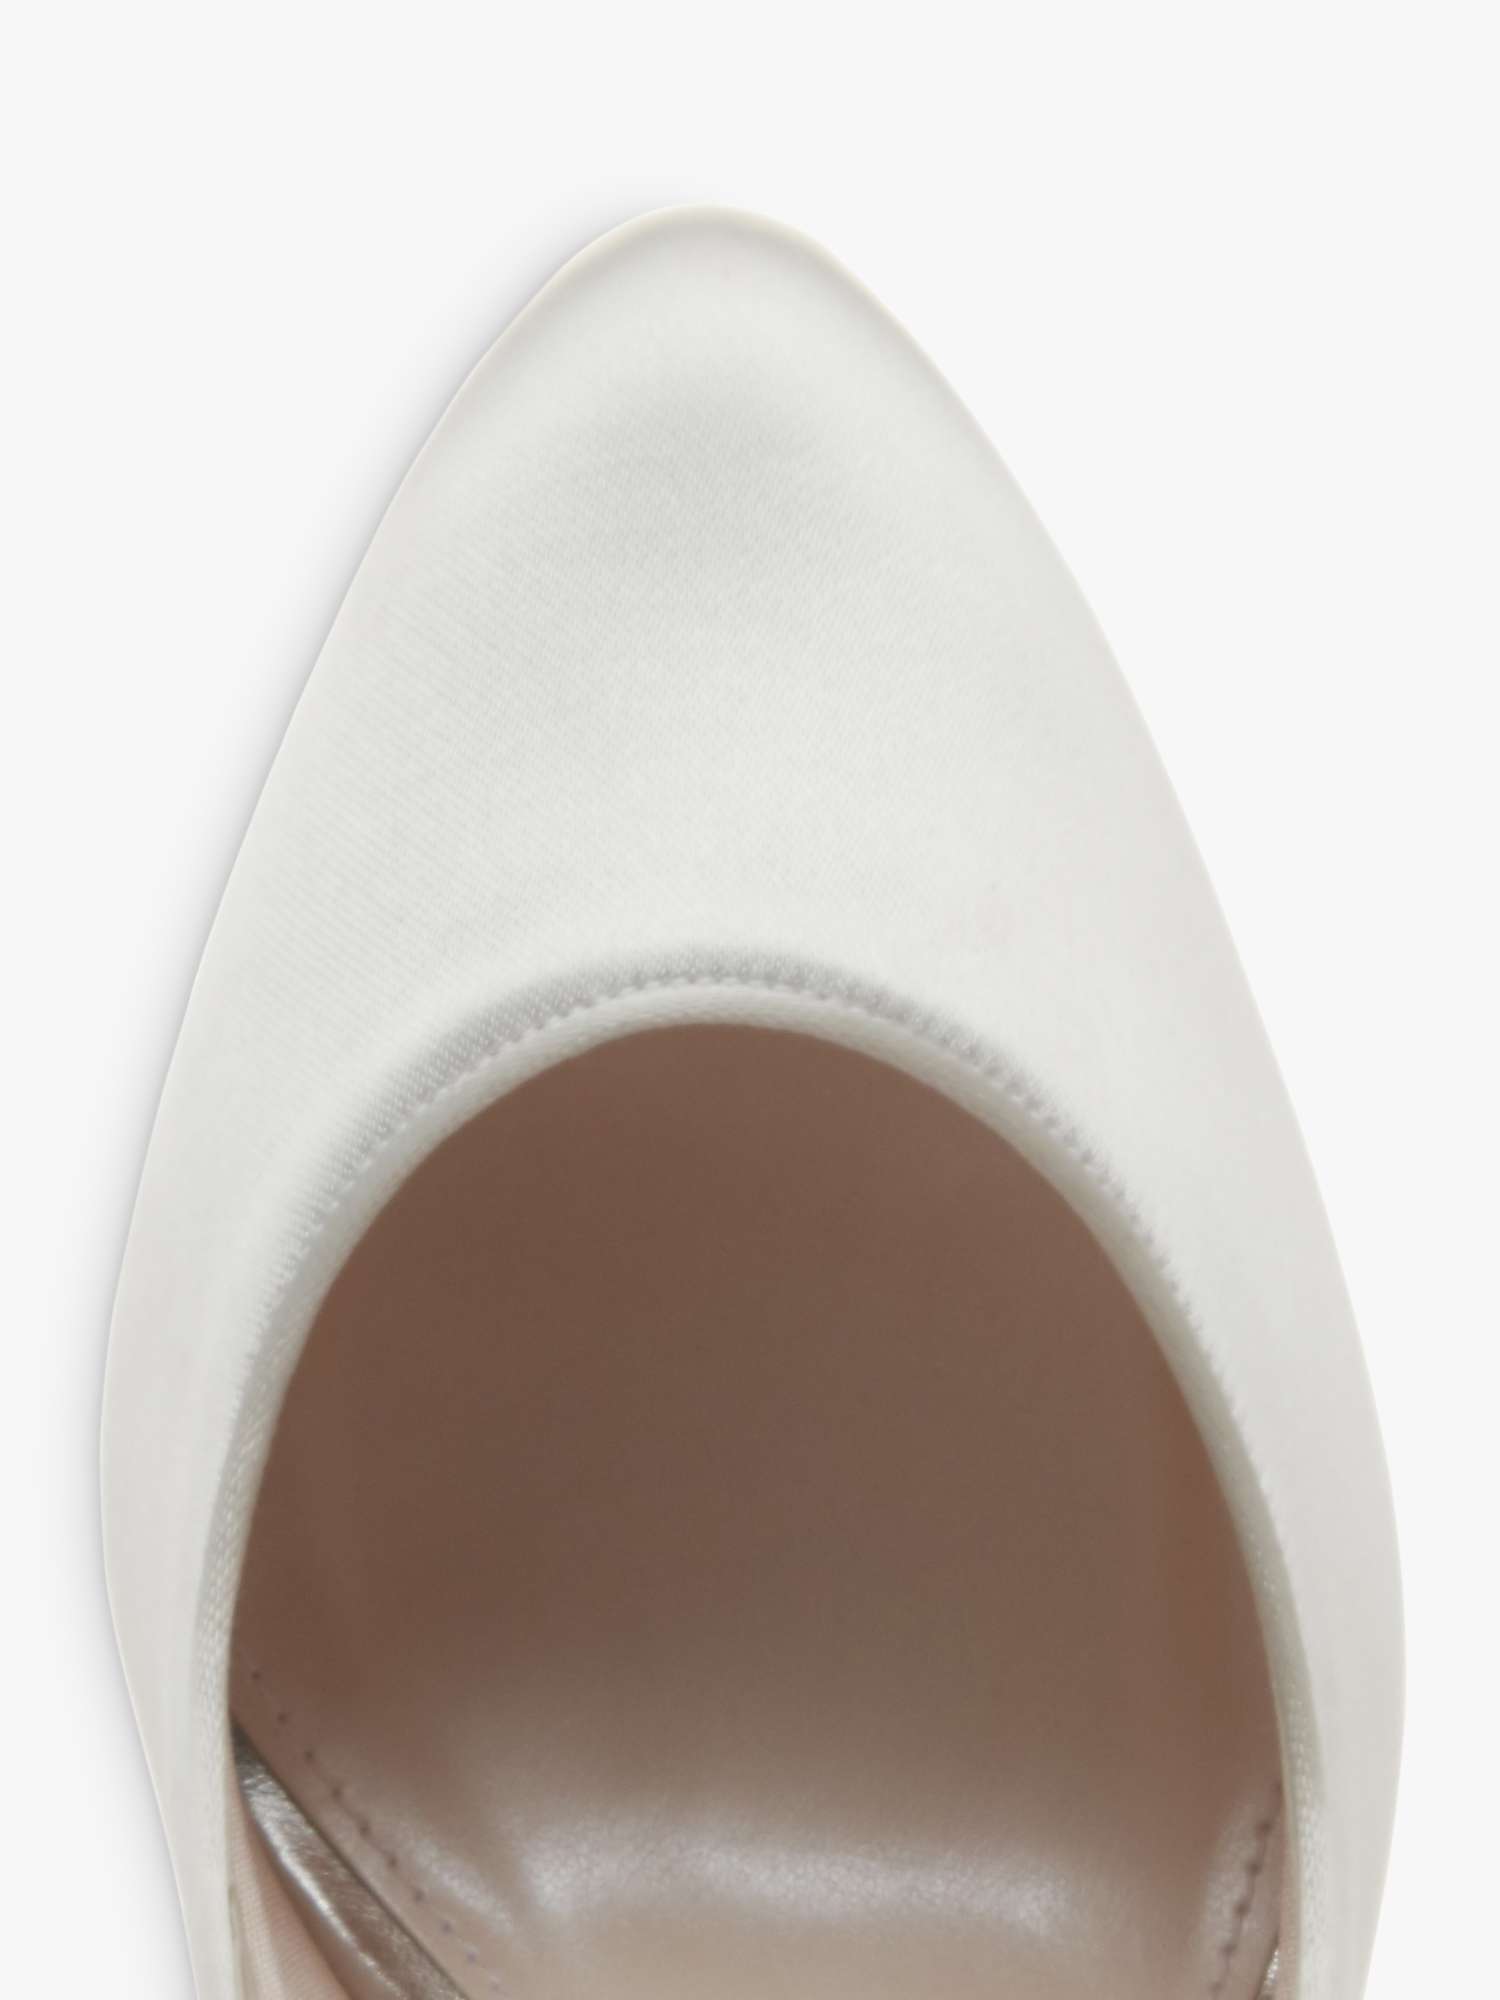 Buy Rainbow Club Willow Embellished Court Shoes, Ivory Satin Online at johnlewis.com